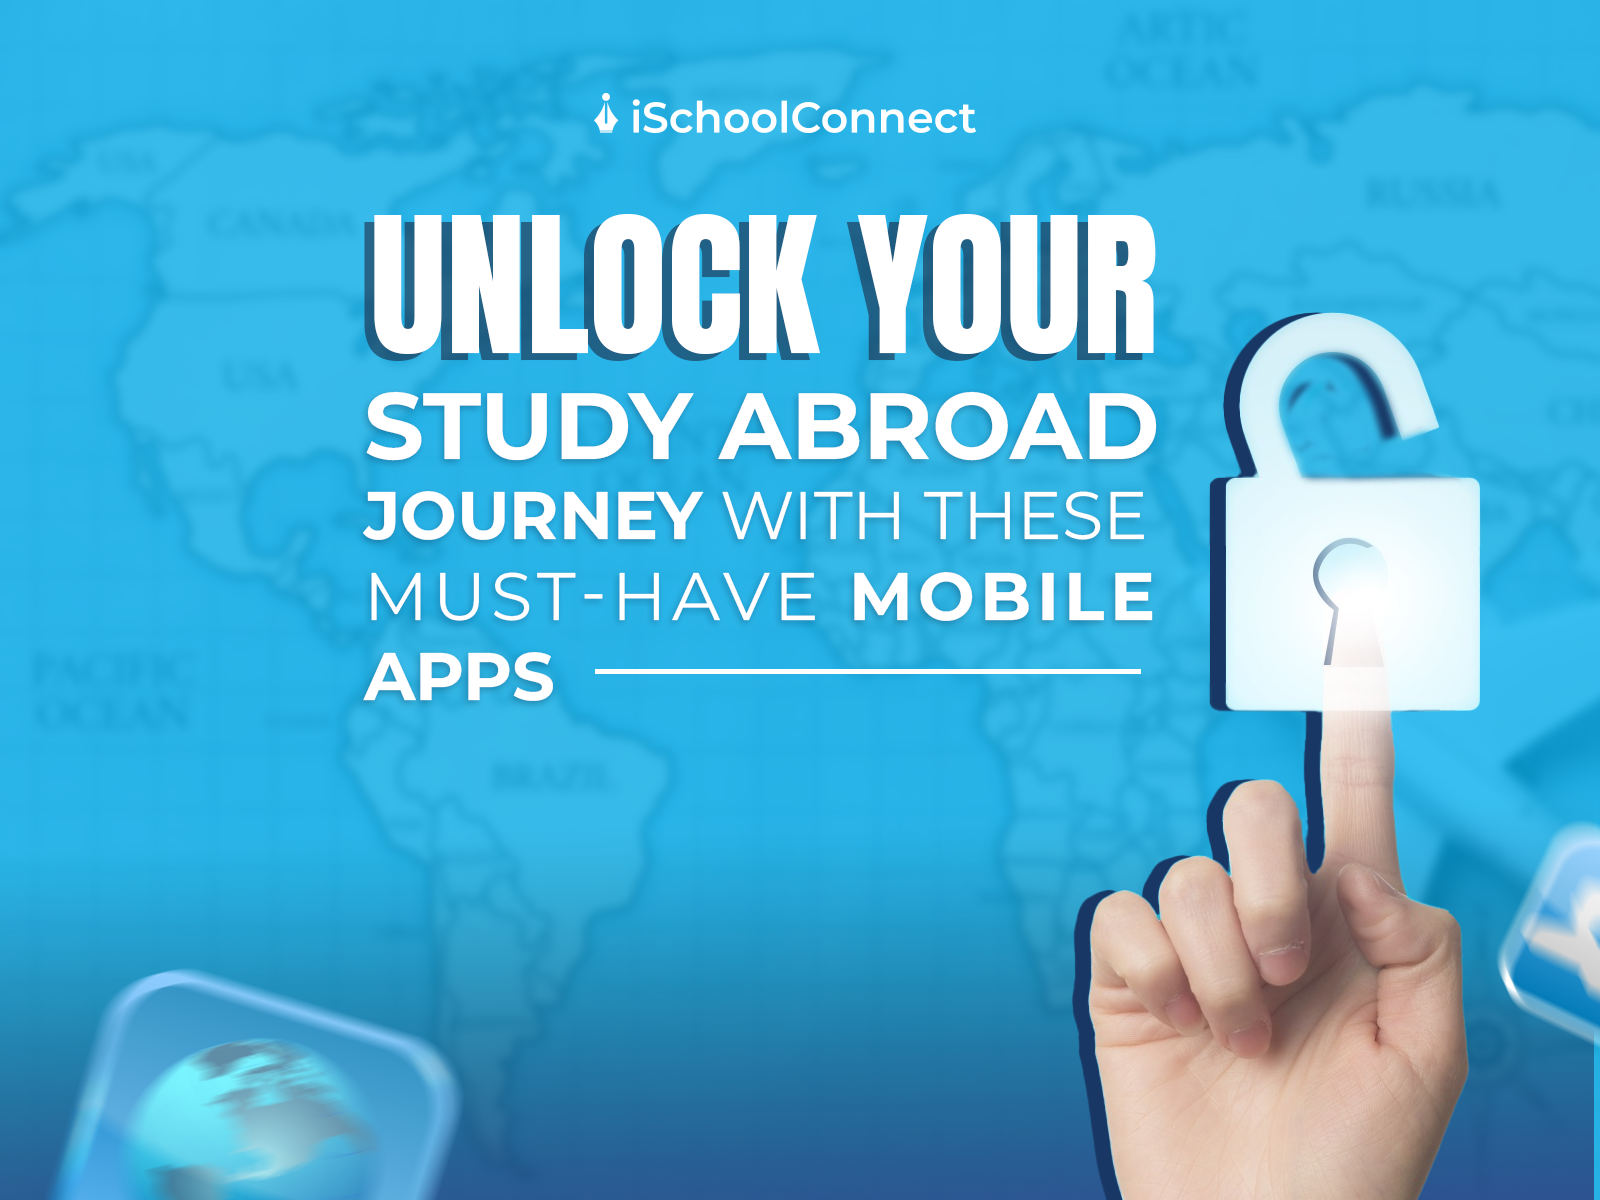 Essential study abroad apps for international students